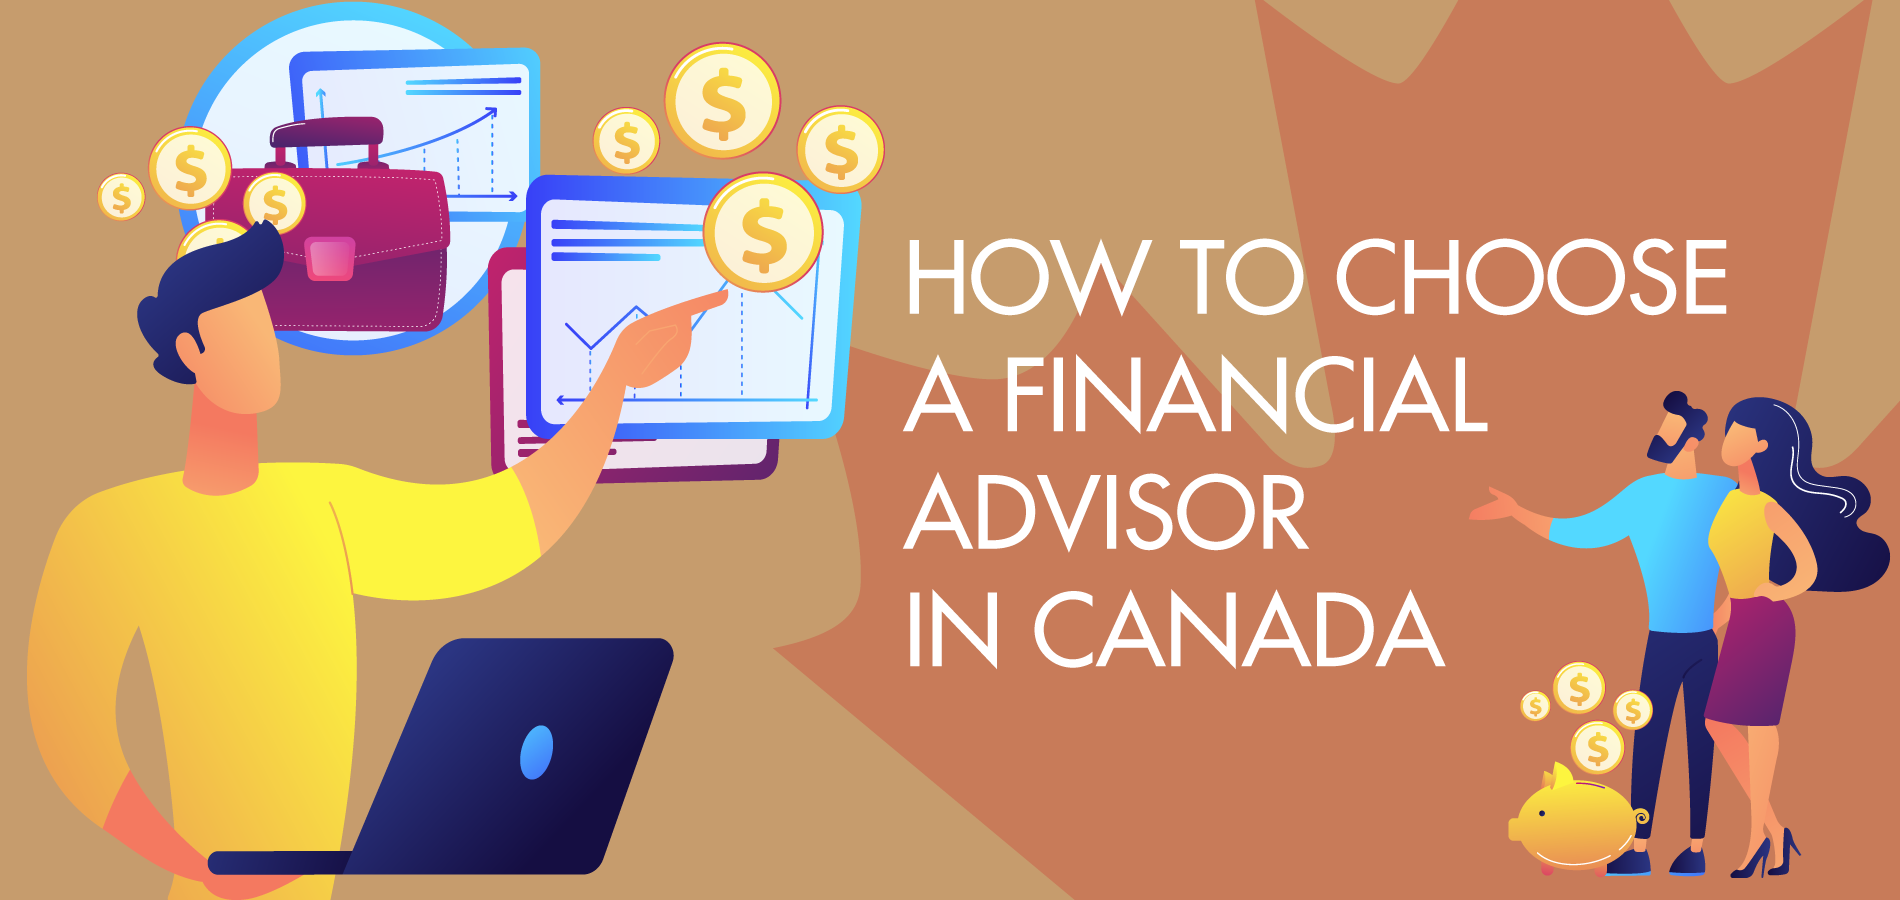 How to Choose a Financial Advisor in Canada